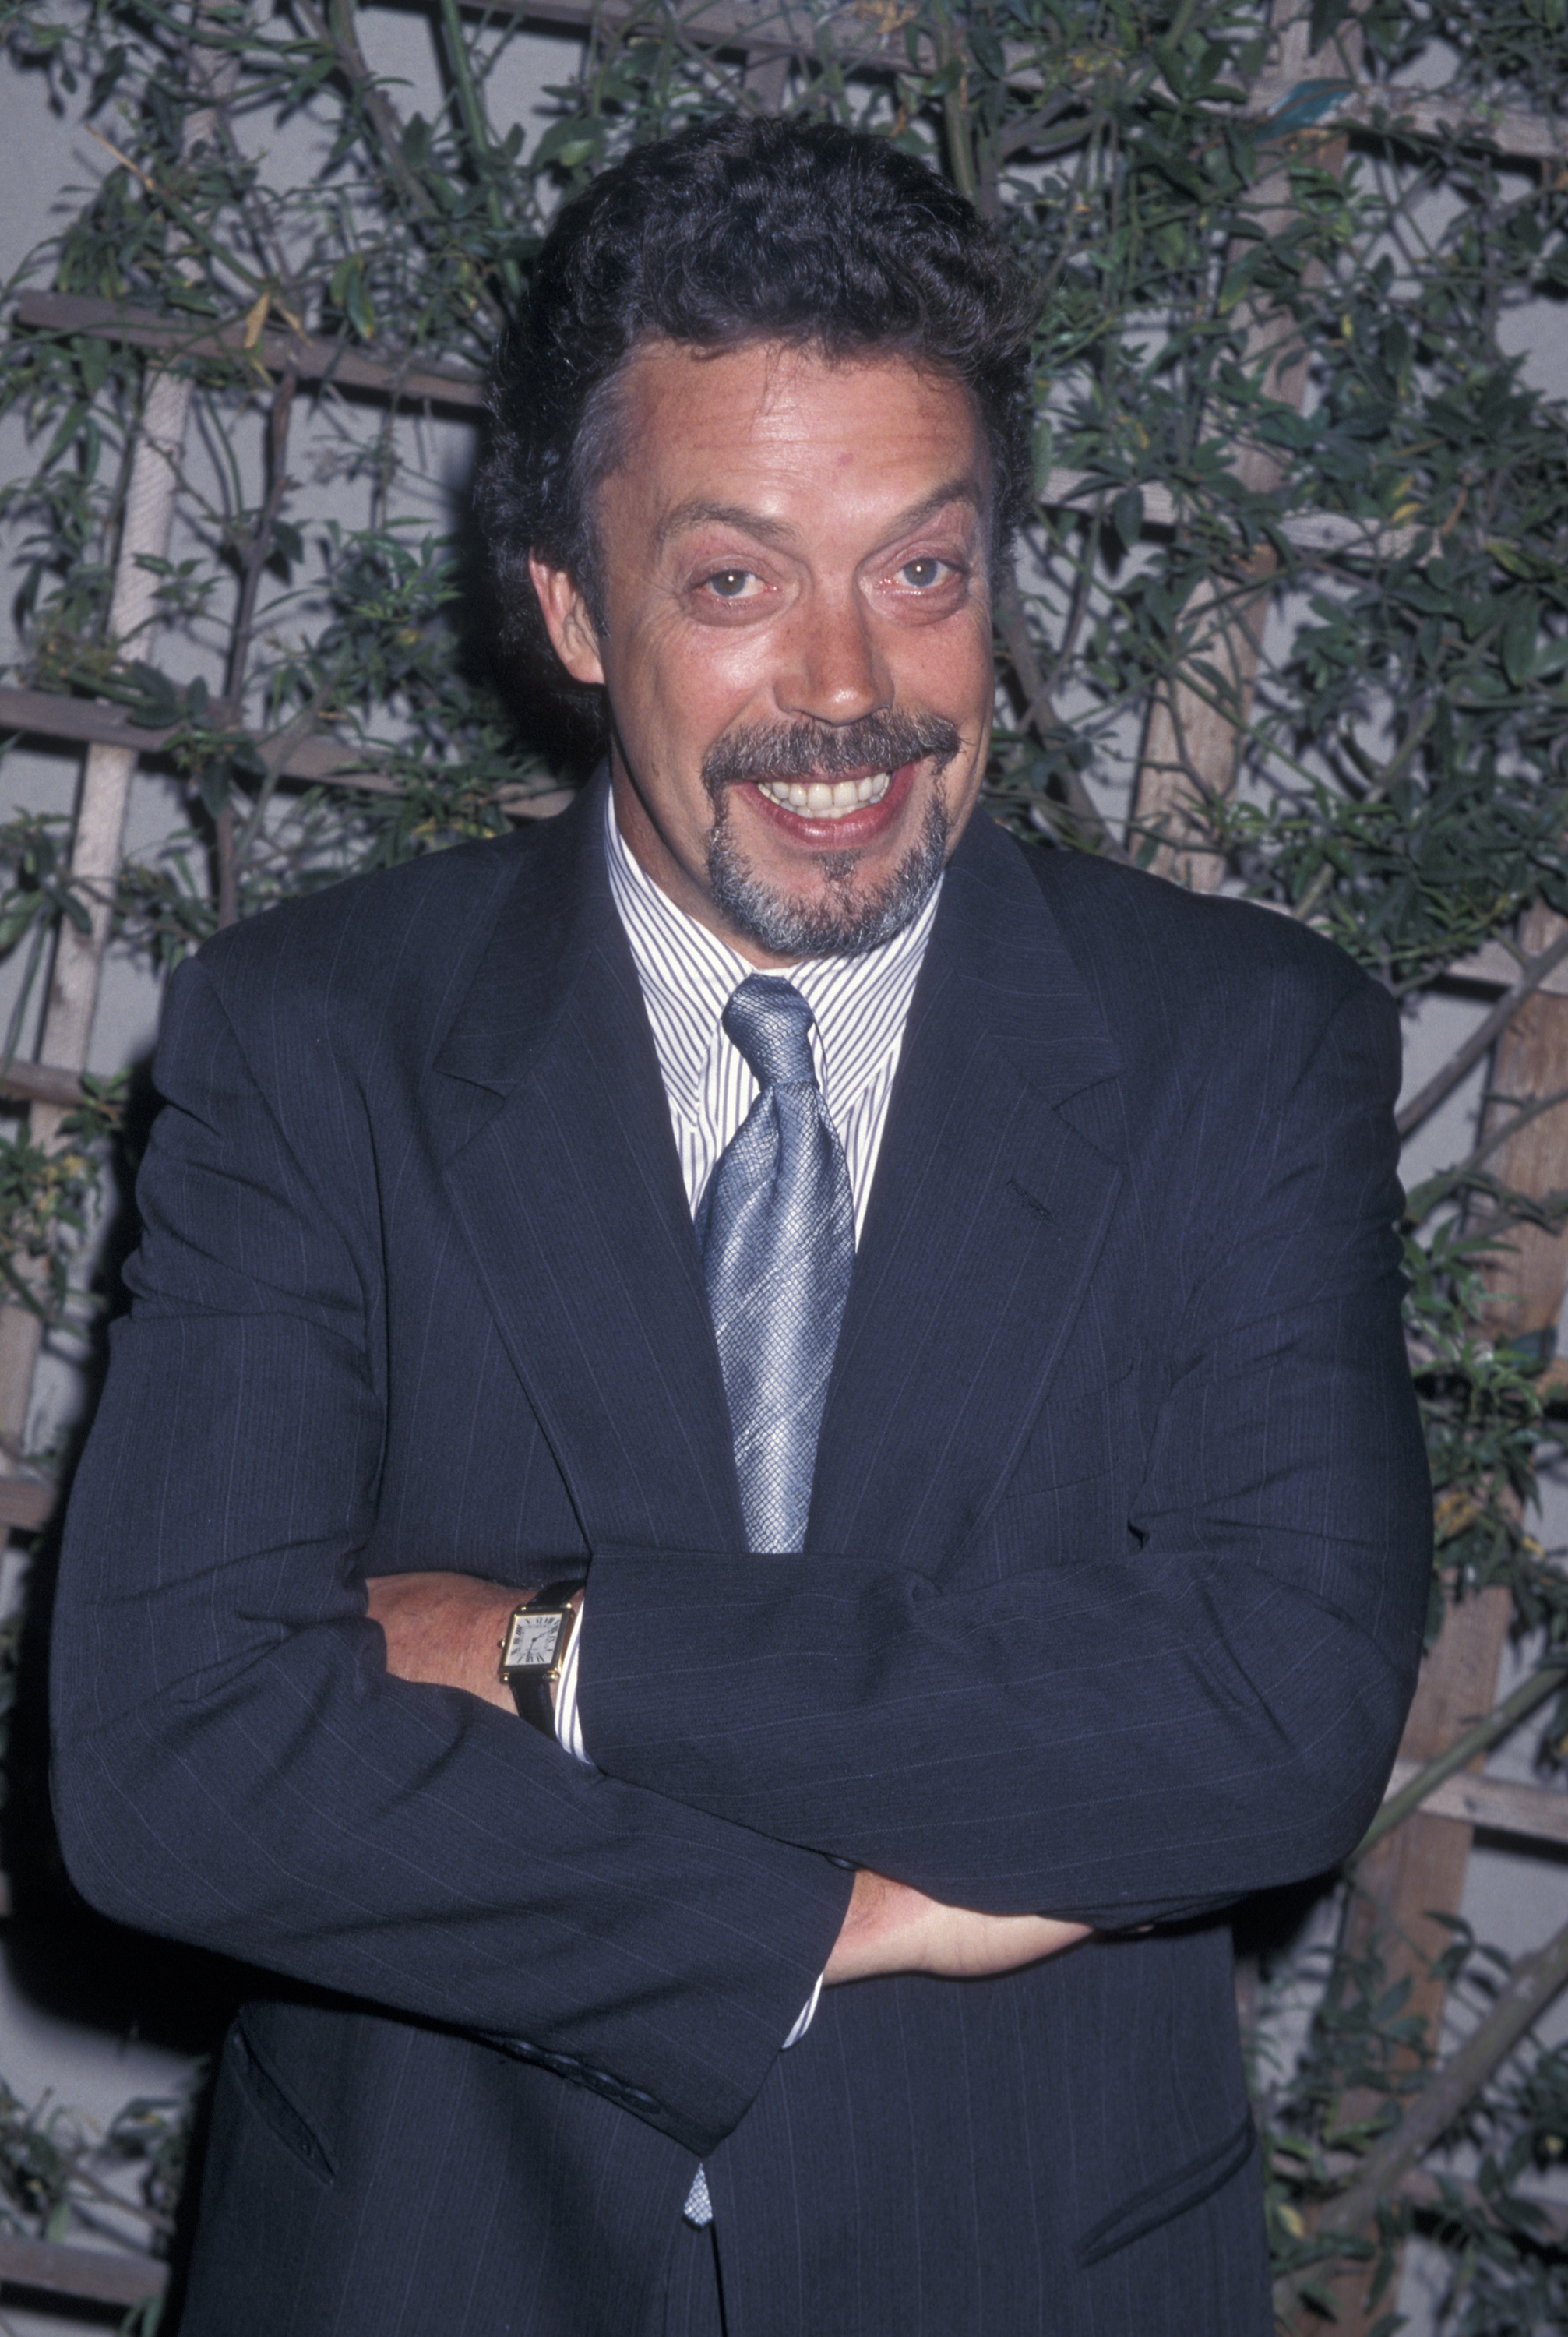 Actor Tim Curry attending 'ABC Summer Press Tour' on July 21, 1997 at the Ritz Carlton Hotel in Pasadena, California | Source: Getty Images